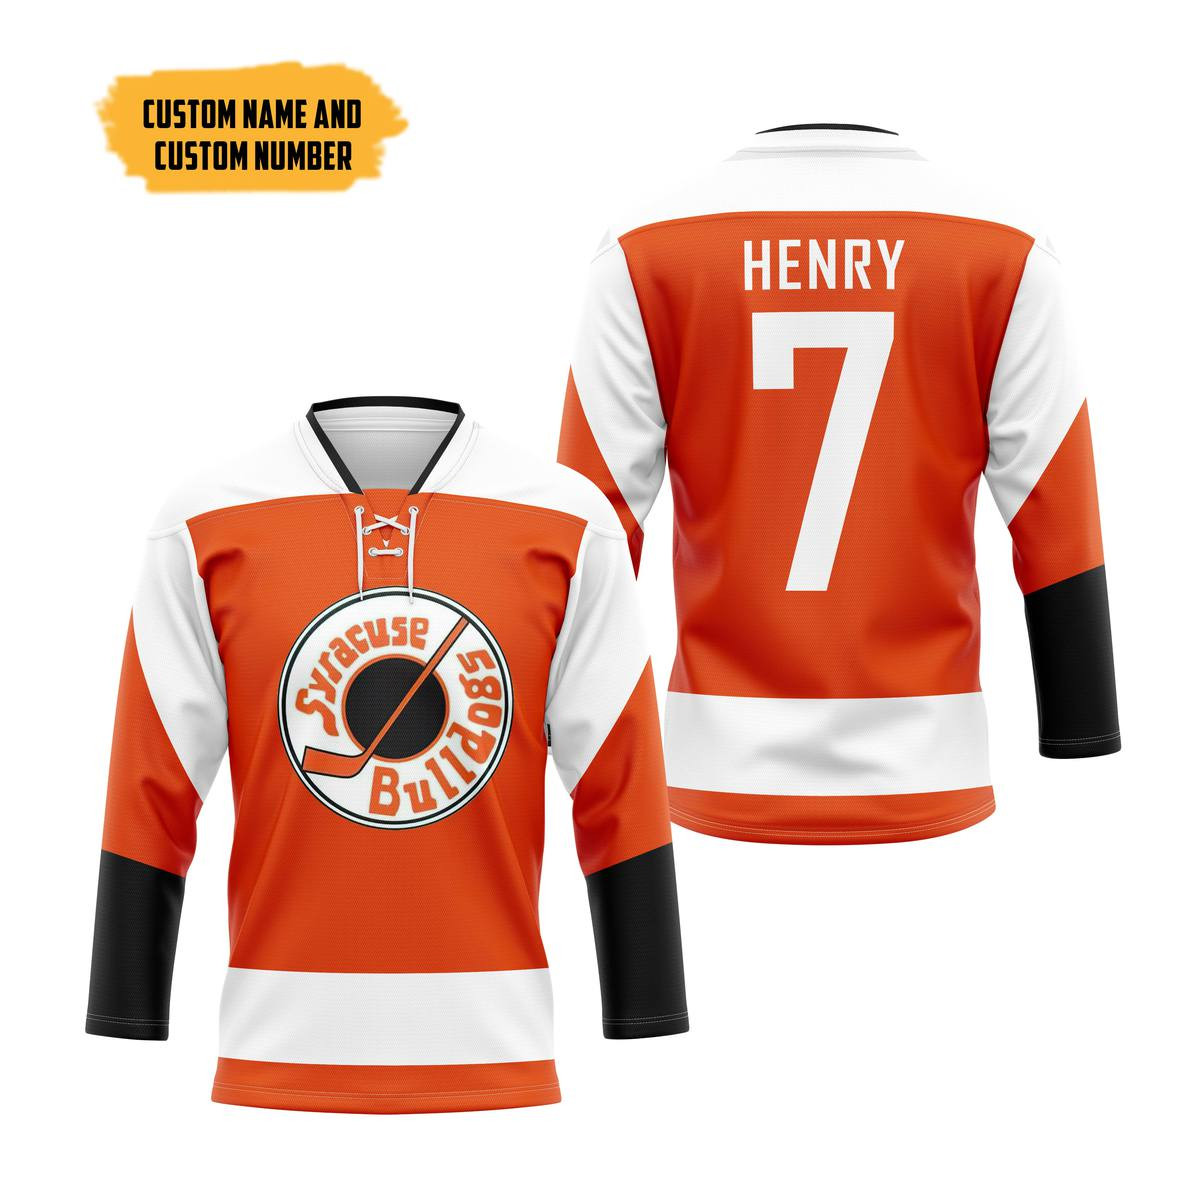 The Best Hockey Jersey Shirt in 2022 387